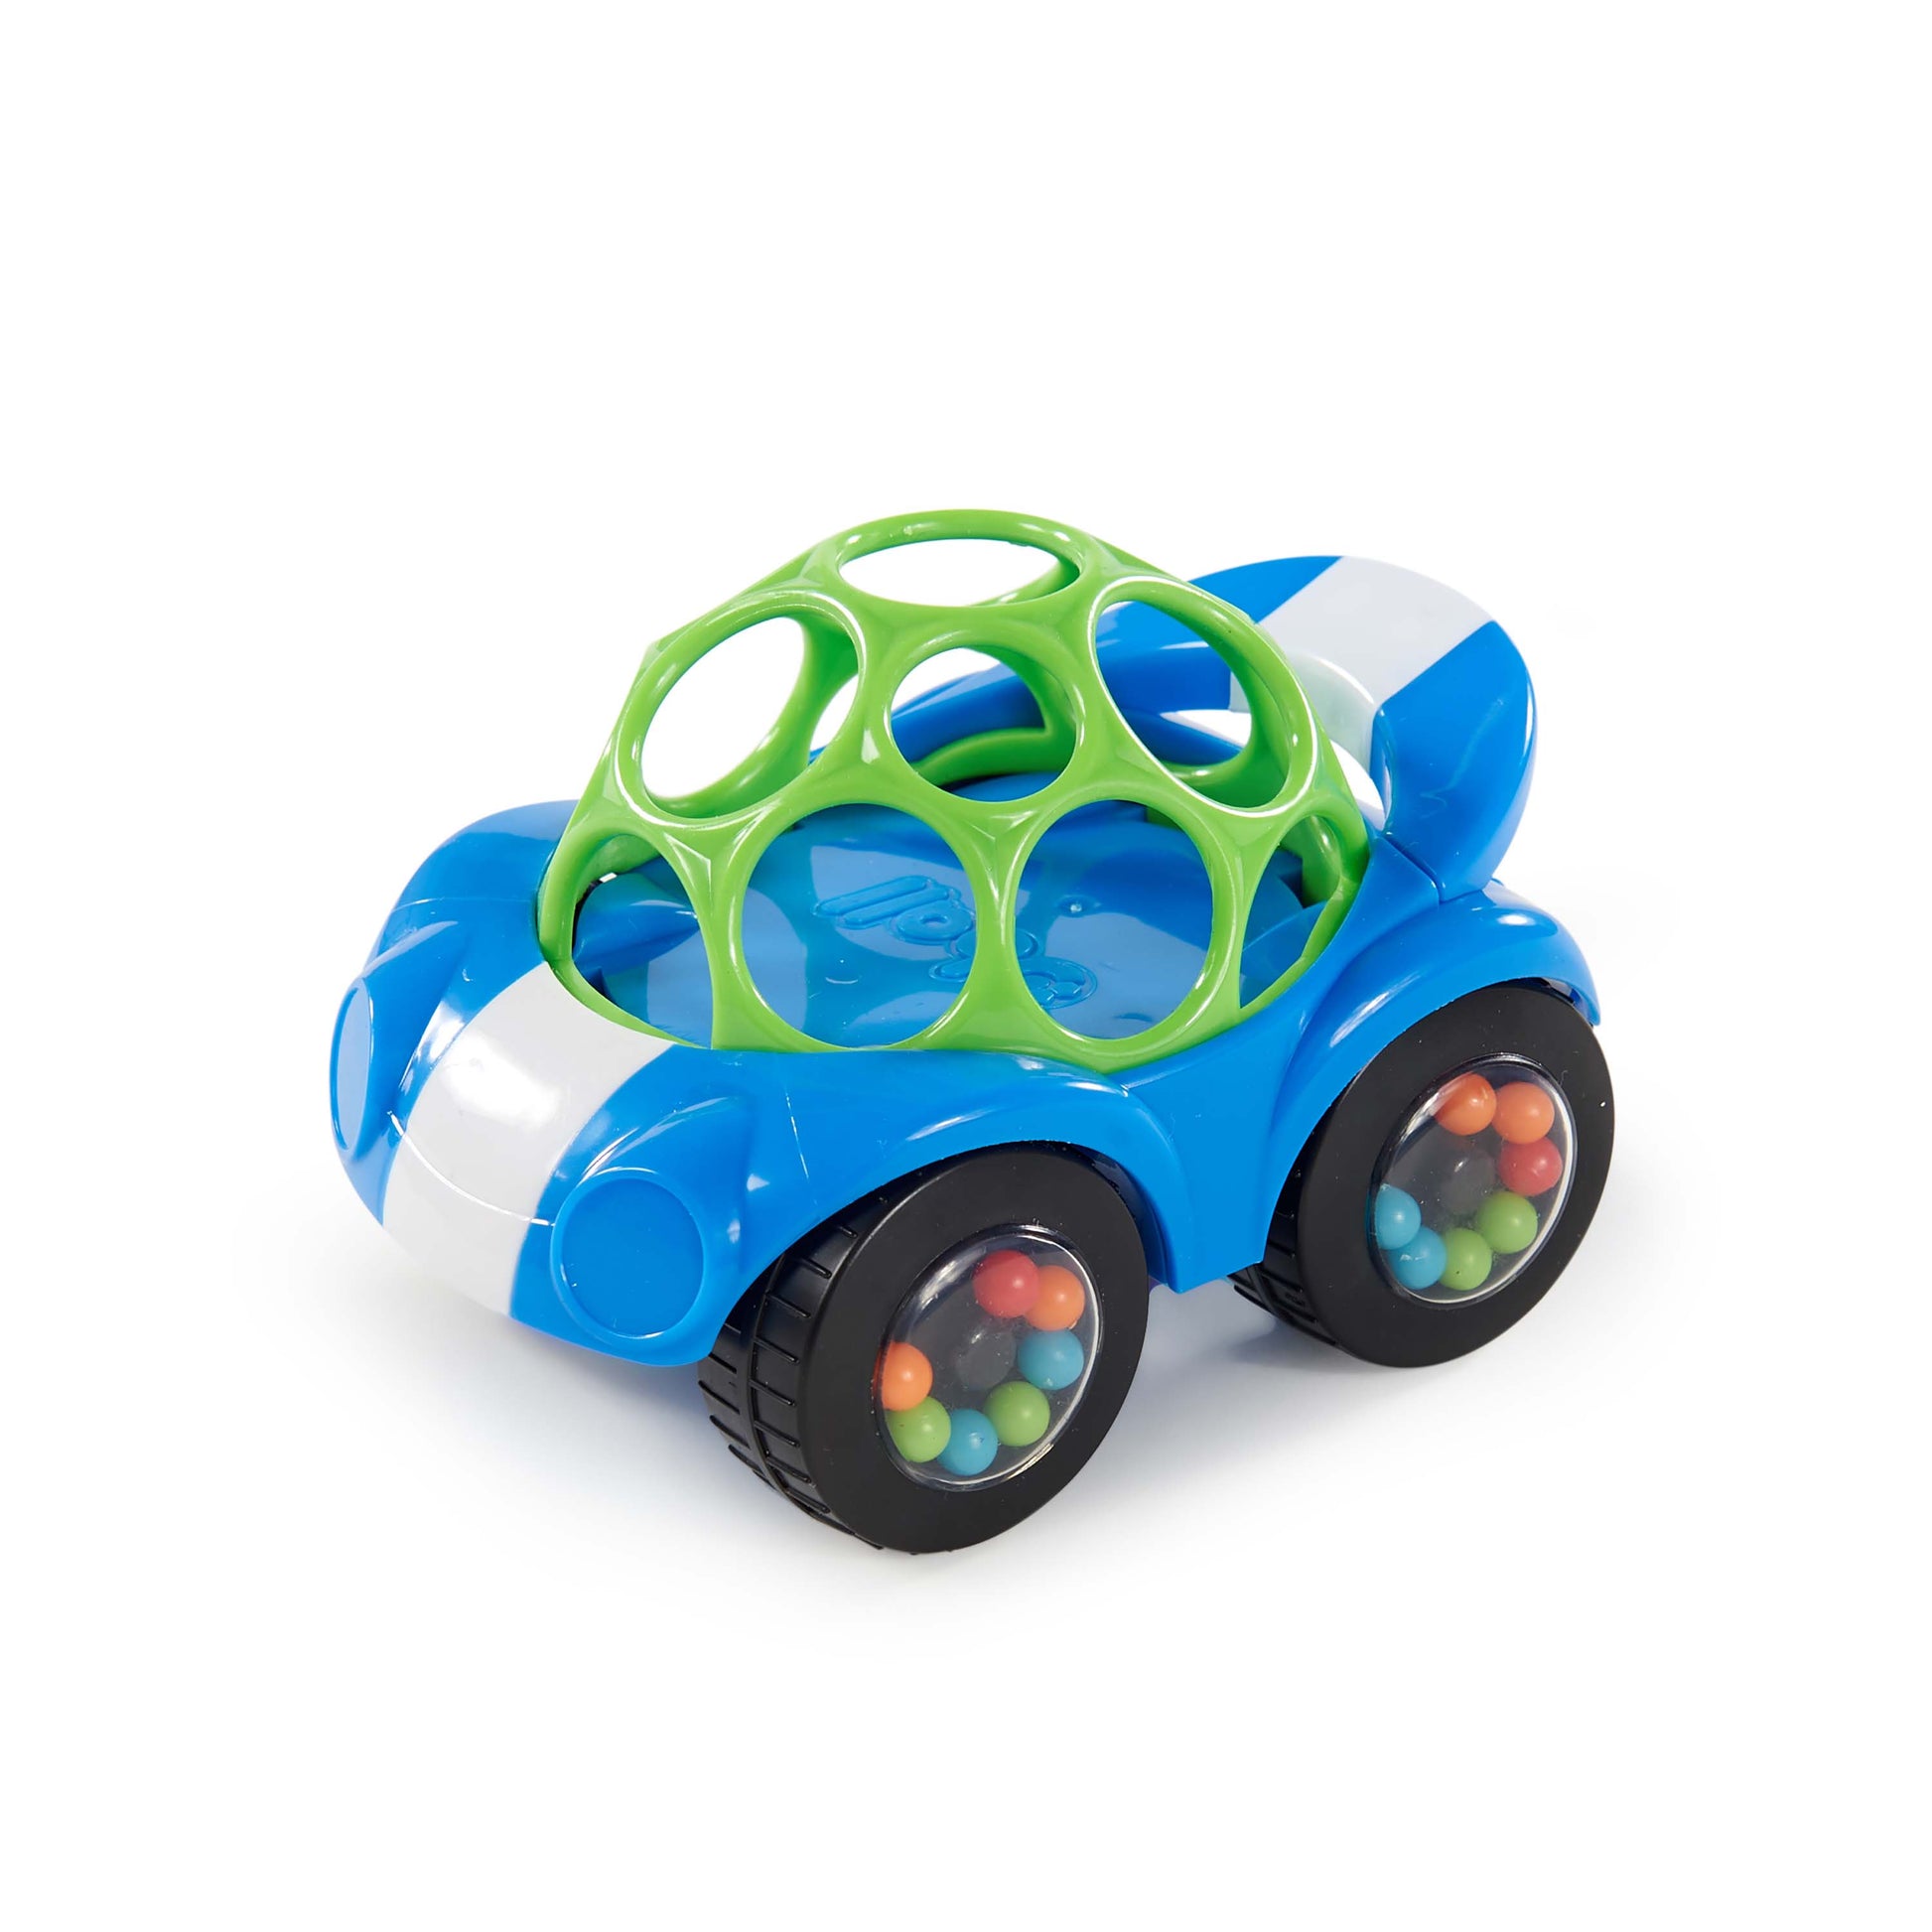 The soft, flexible O Ball Rattle & Roll material feature ample finger holes to make it a snap for baby to grasp and roll!